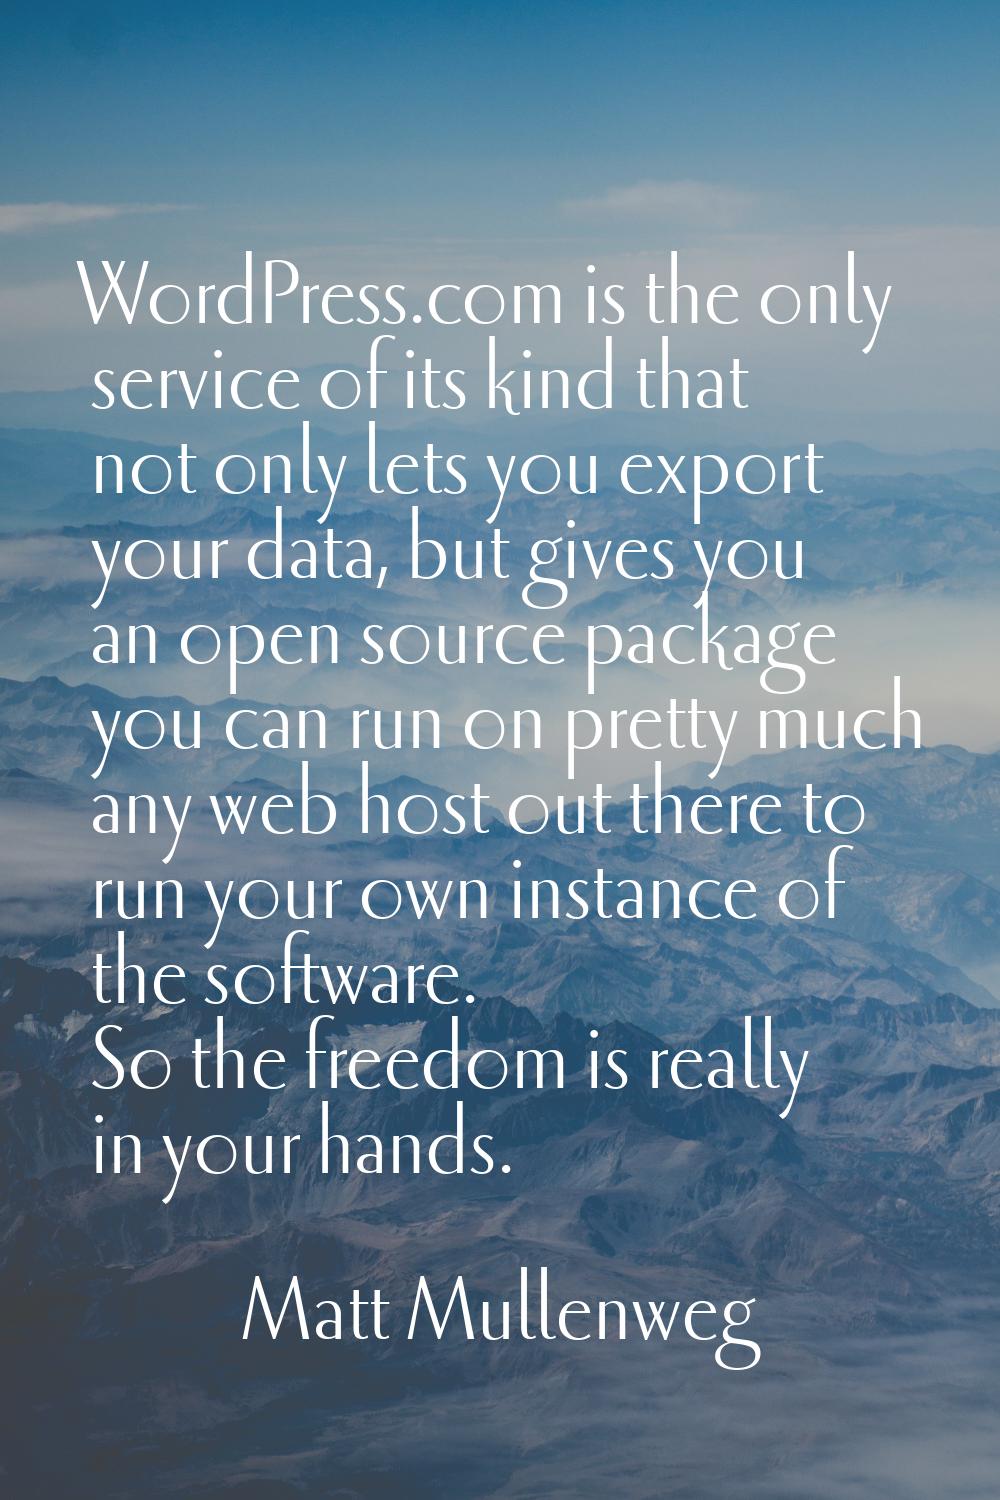 WordPress.com is the only service of its kind that not only lets you export your data, but gives yo